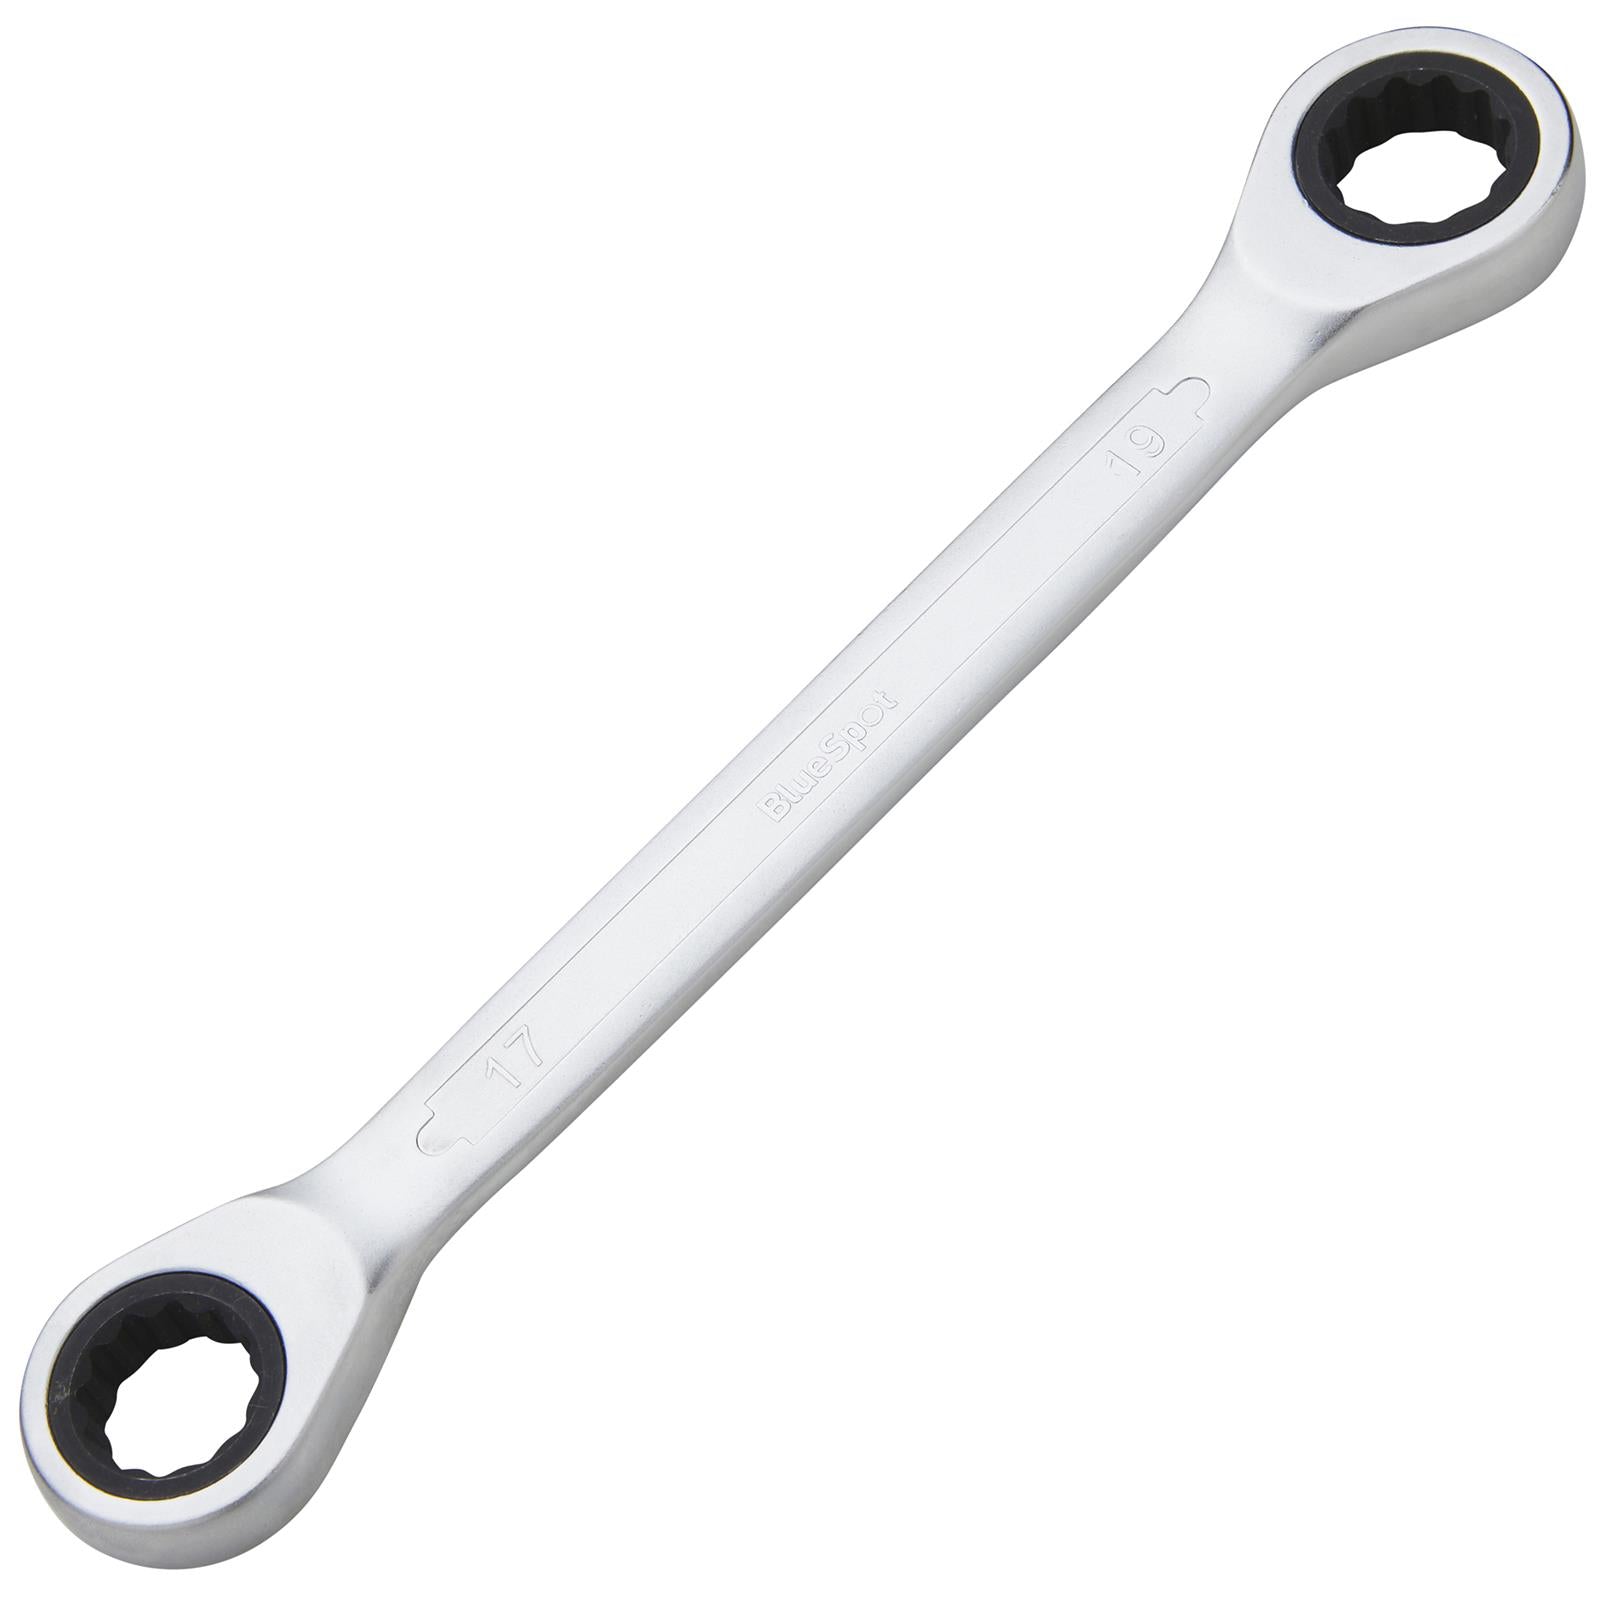 BlueSpot Ratchet Ring Spanner Double End 17mm x 19mm 72 Tooth